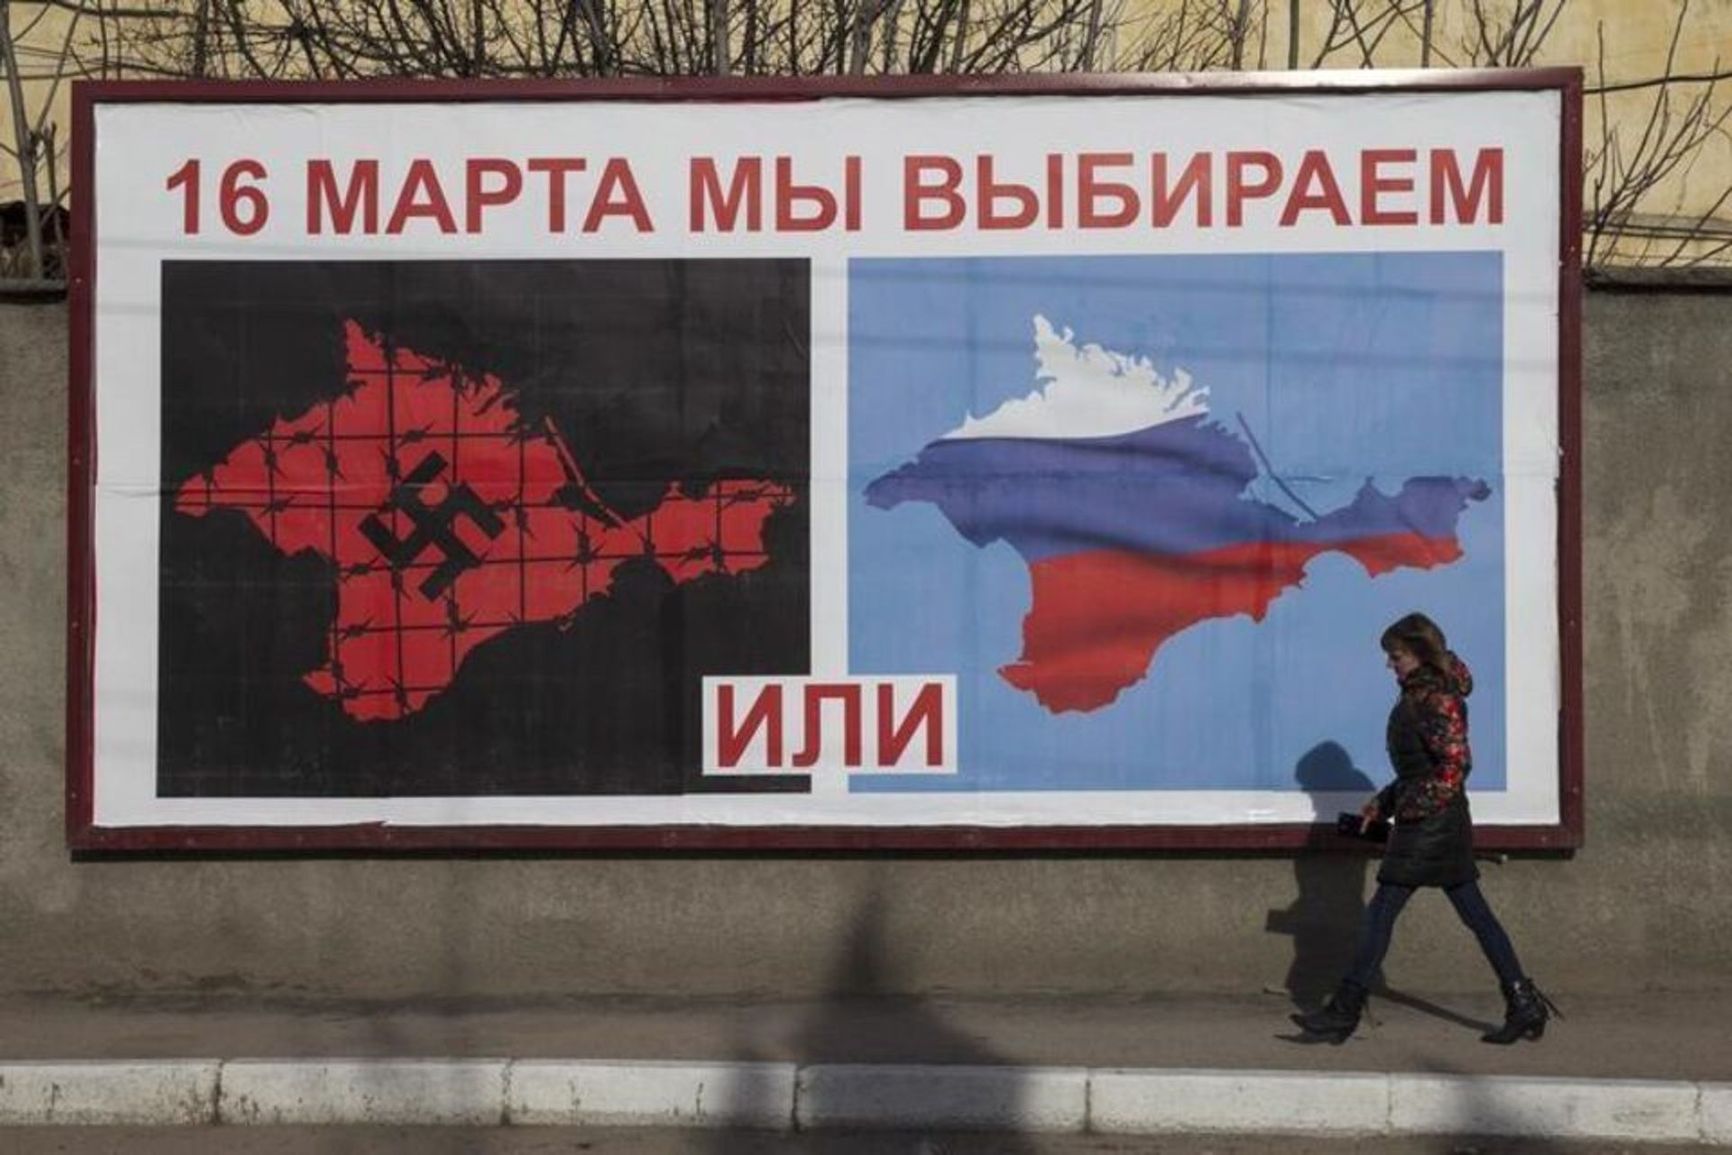 A billboard in Crimea before the referendum reads “On March 16 we choose [this] or [this]”